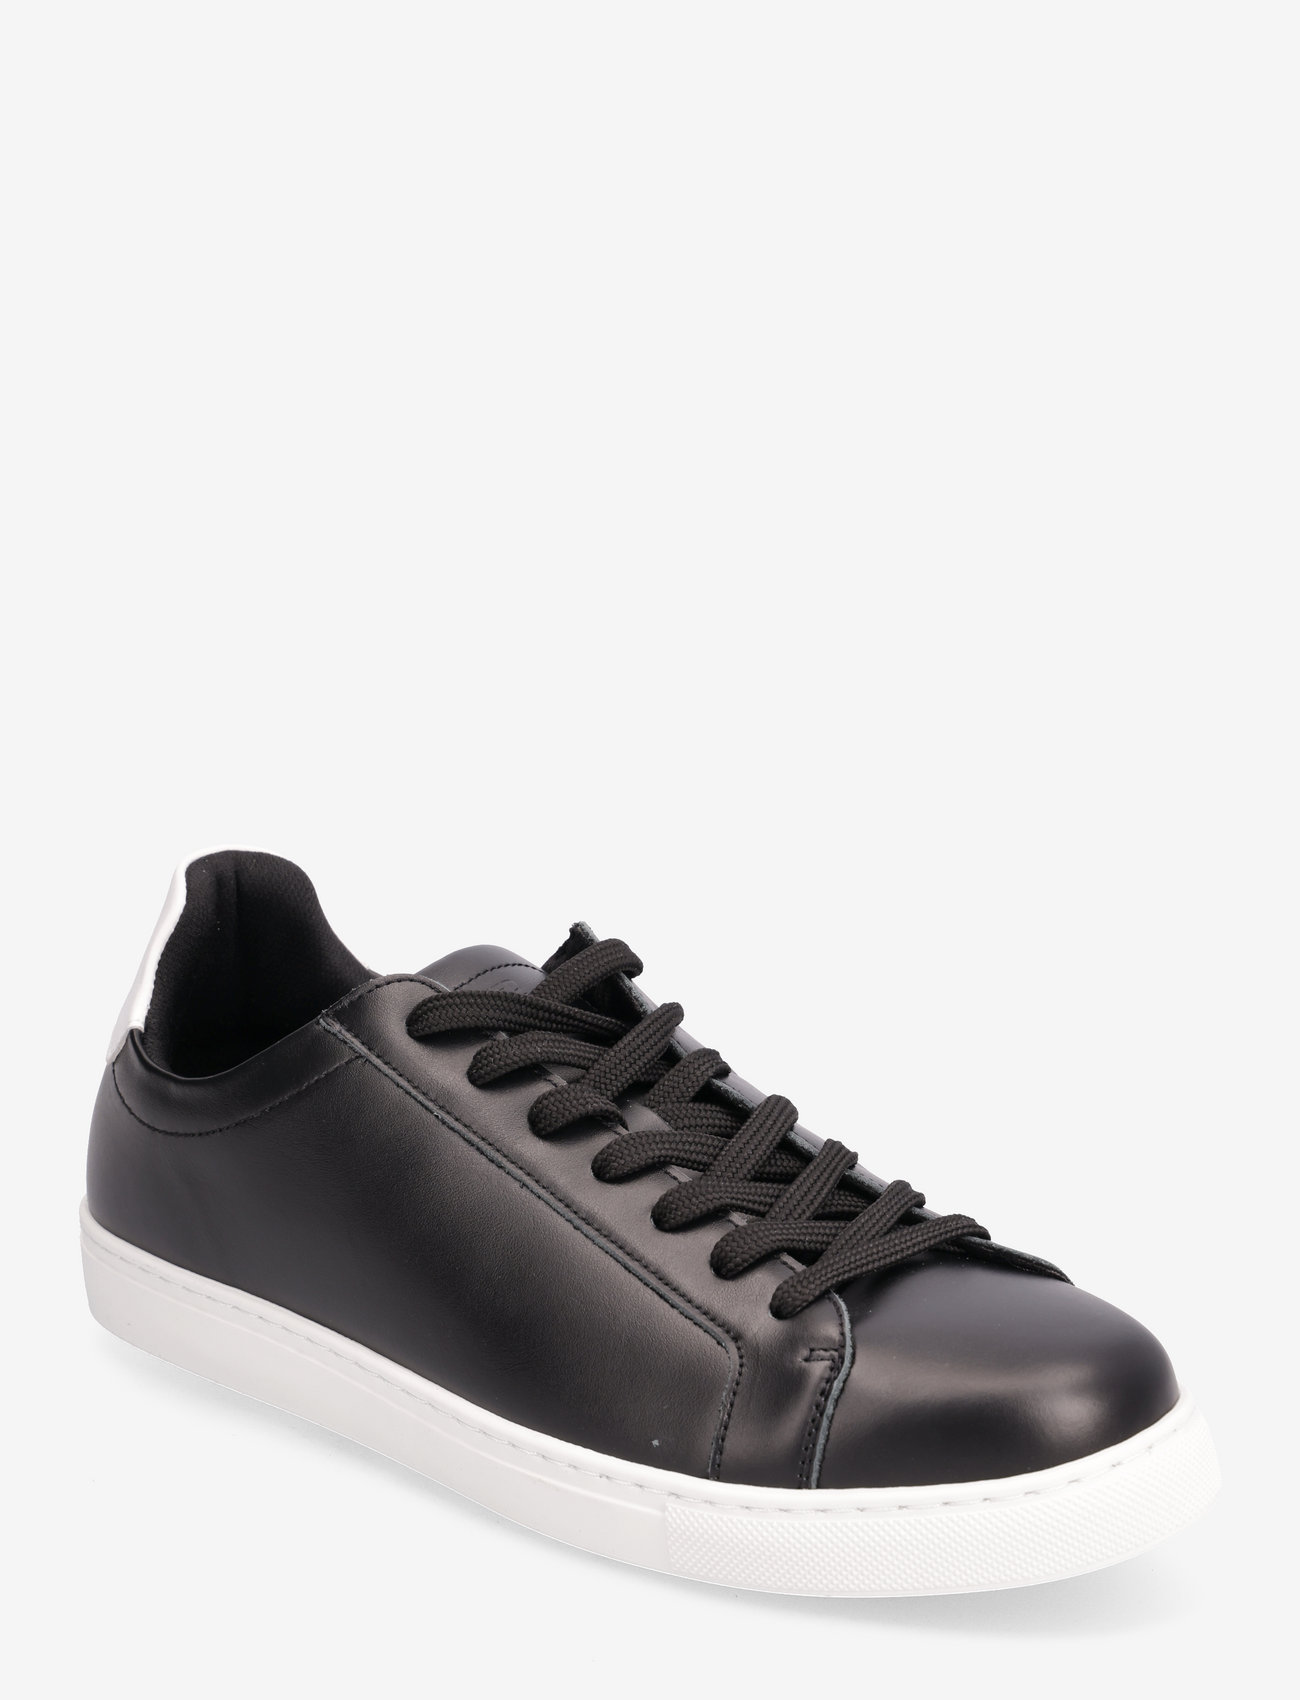 Selected Homme - SLHEVAN LEATHER CONTRAST SNEAKER B - black - 0